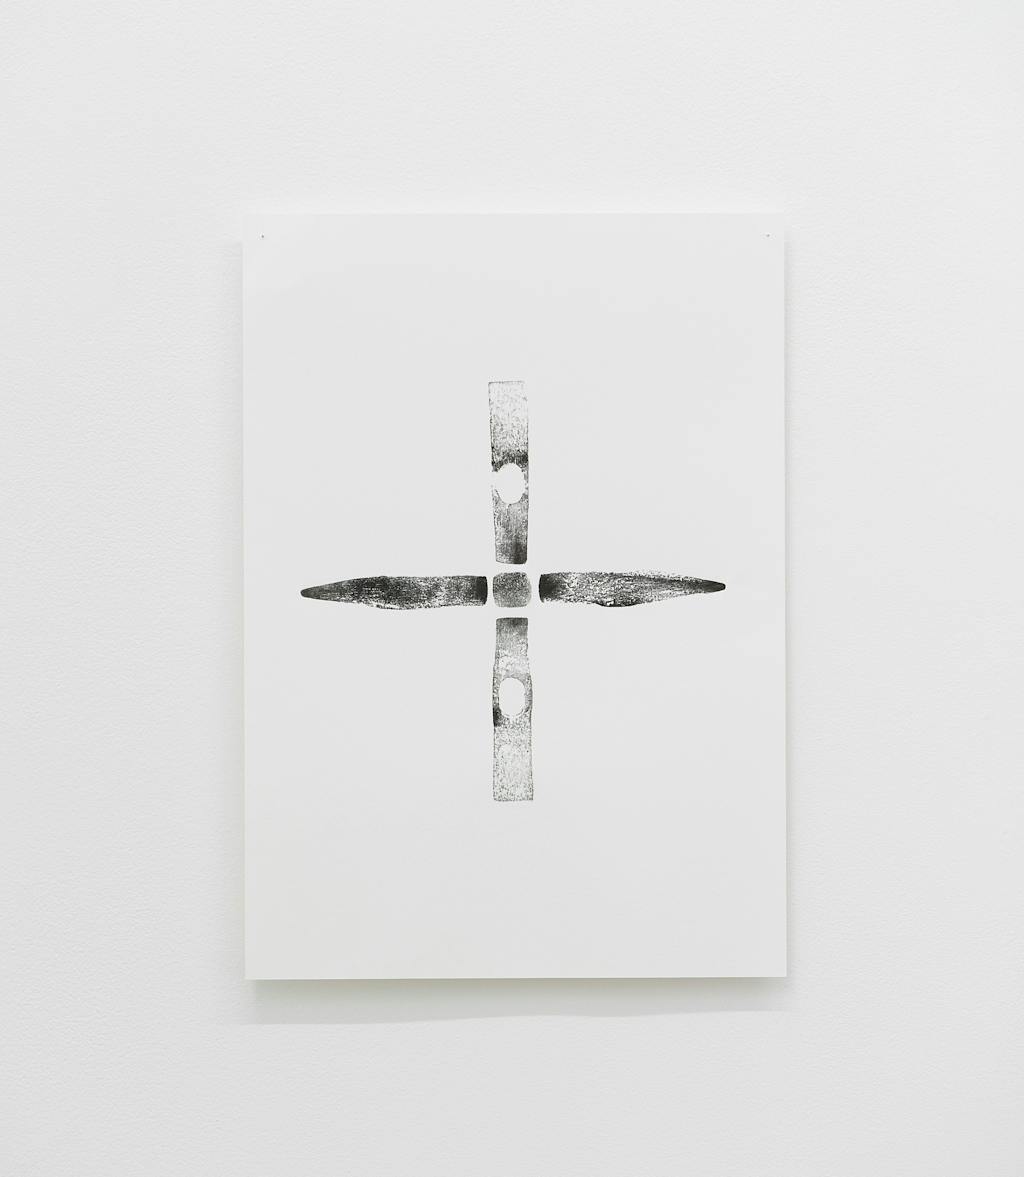 <p style="font-size:10px">Wind Rose, 2018, print on paper, 42 x 29.7 cm, edition 2/5</p>

<p style="font-size:10px">The 5 sides of the artist’s father’s hammer are printed. The traces and impacts left on the metal throughout the years appear, putting forward the fragile and sensitive side of the object.</p> - © Image courtesy of the artist and Grey Noise, Dubai., Paris Internationale